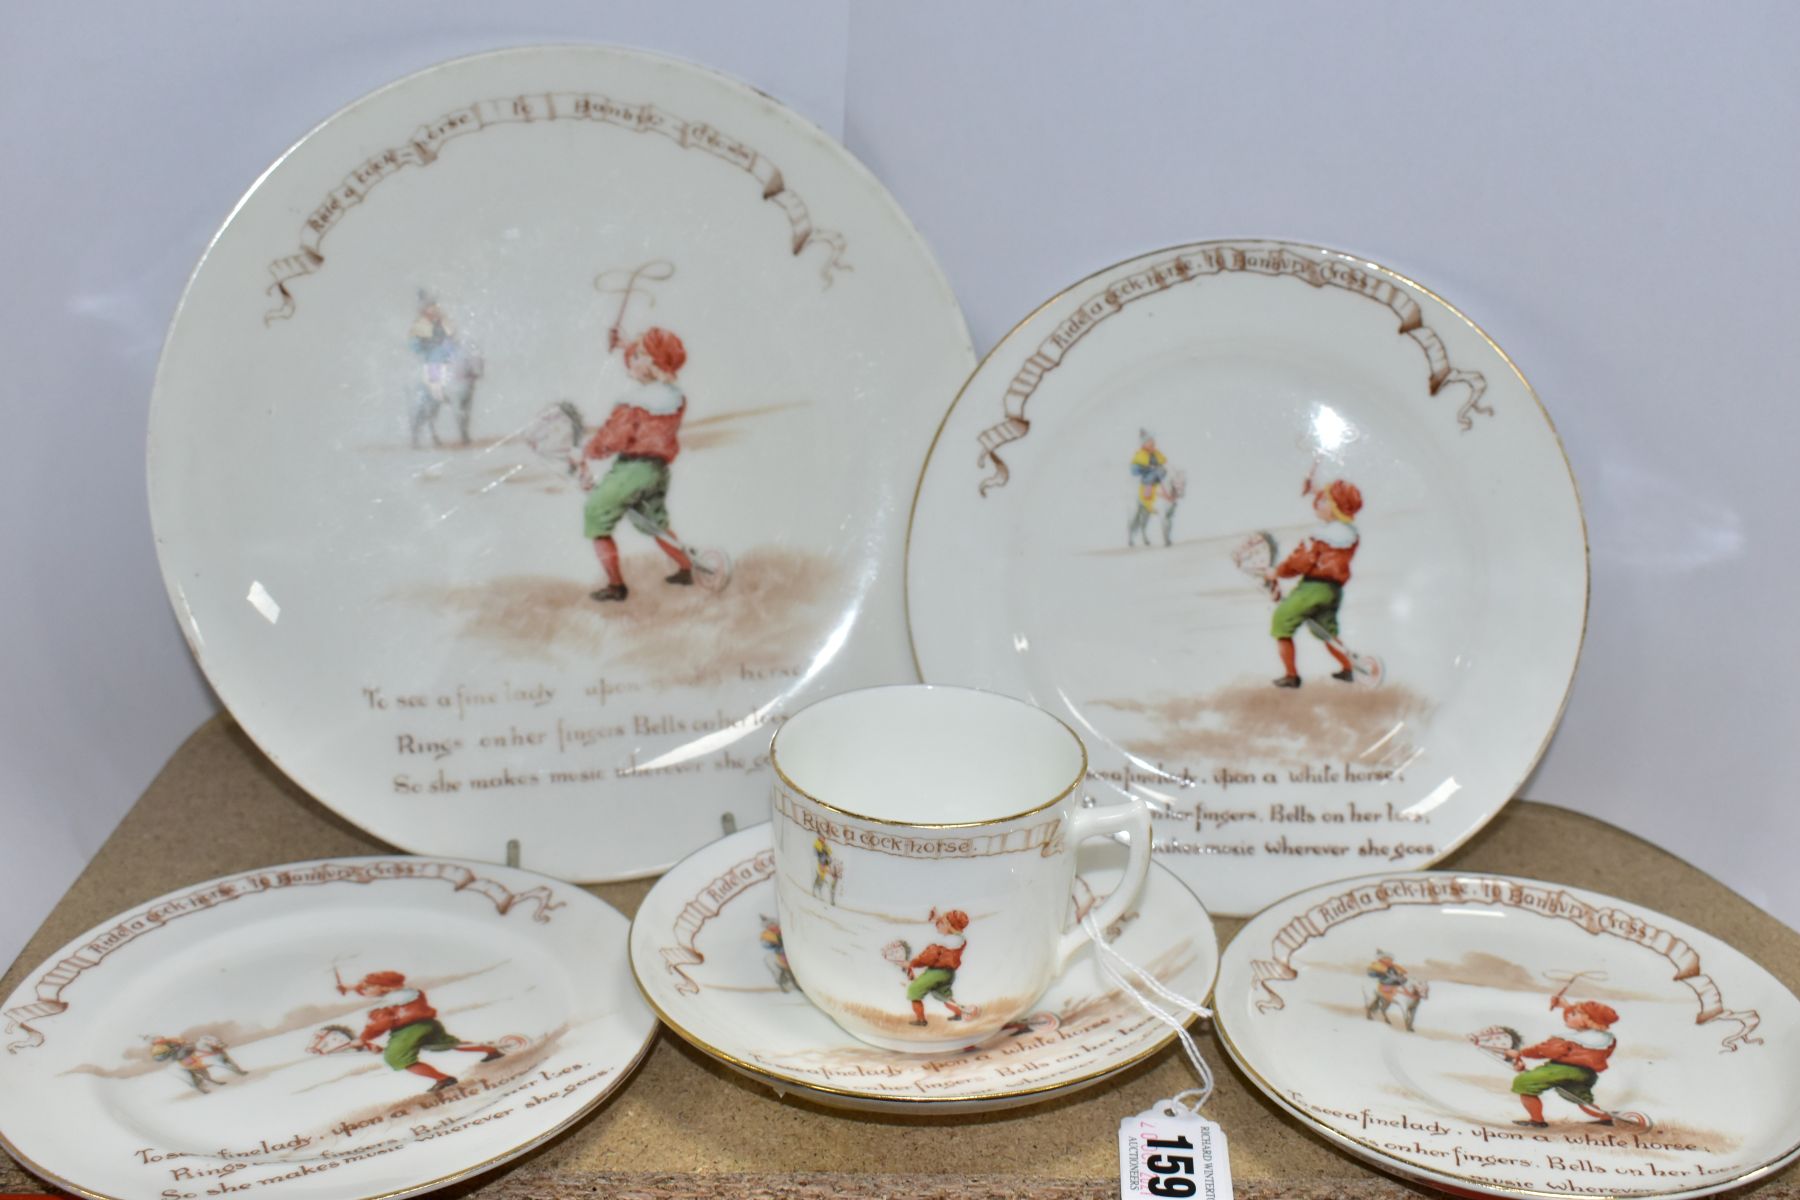 SIX PIECES OF ROYAL DOULTON NURSERY RHYMES 'A' SERIES WARE, DESIGNED BY WILLIAM SAVAGE COOPER, 'Ride